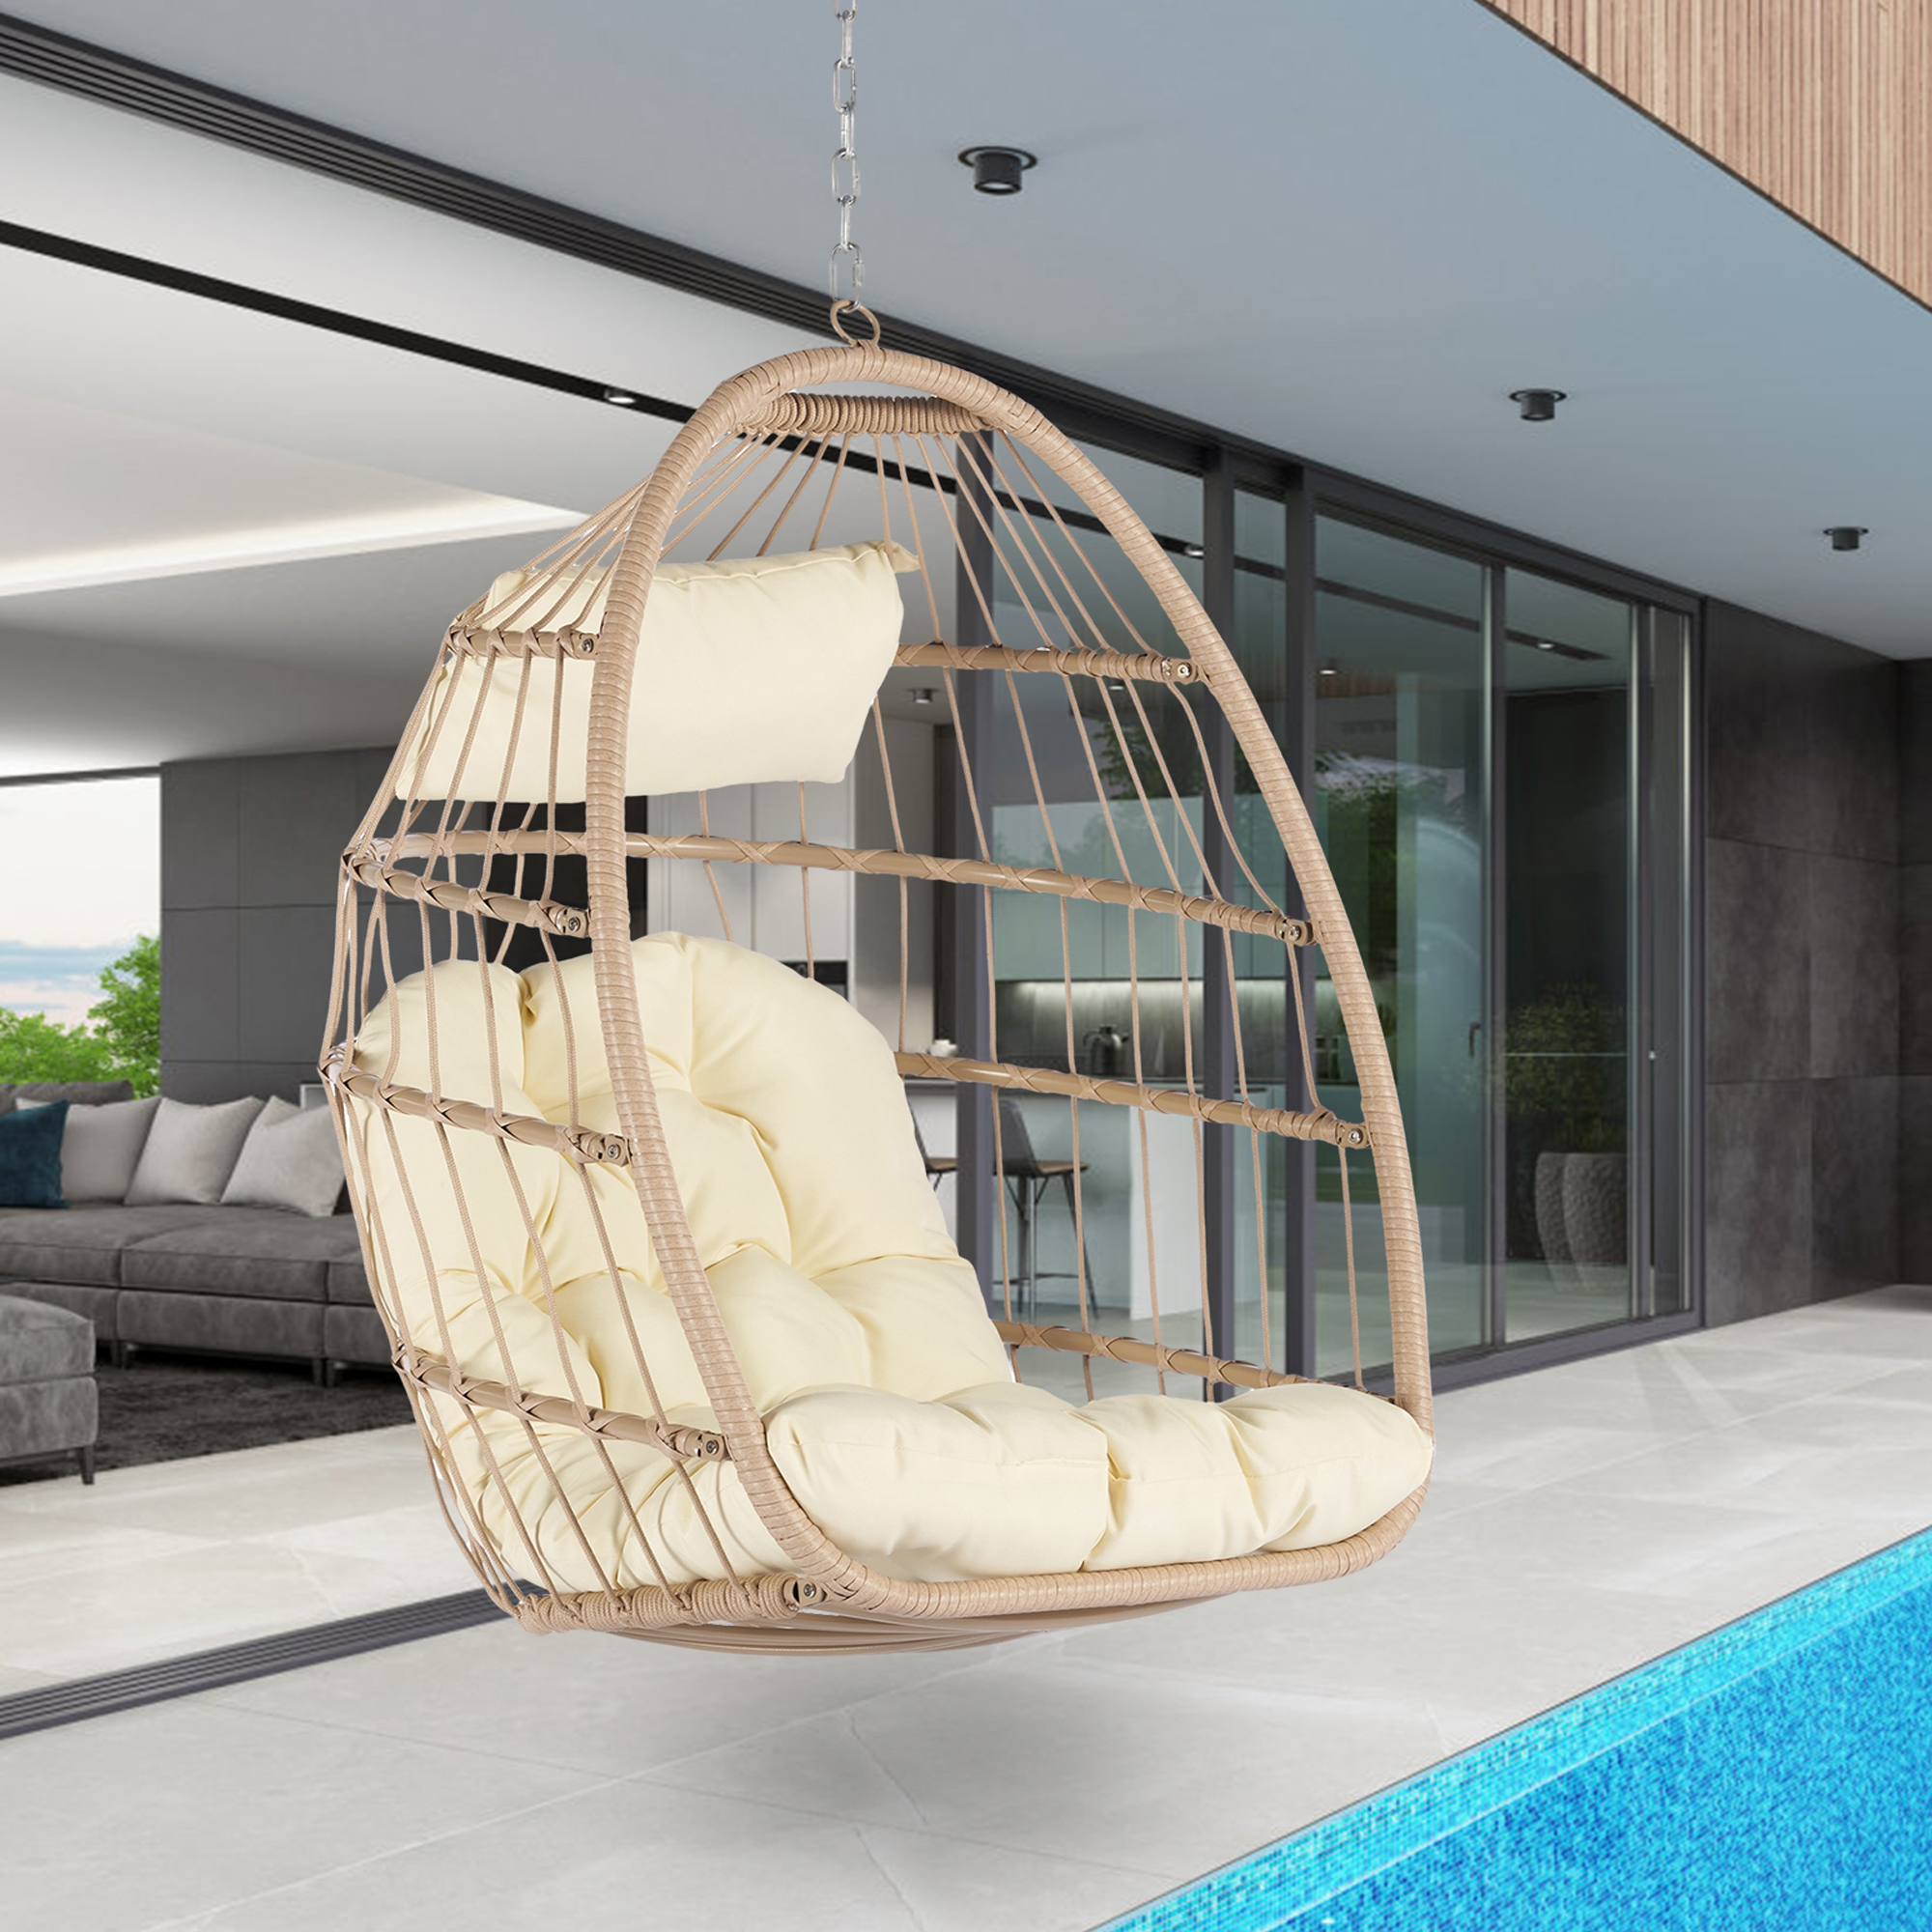 Patio Wicker Hanging Chair, Egg Chair Hammock Chair with UV Resistant Cushion and Pillow for Indoor Outdoor, Patio Backyard Balcony Lounge Rattan Swing Chair - image 1 of 7